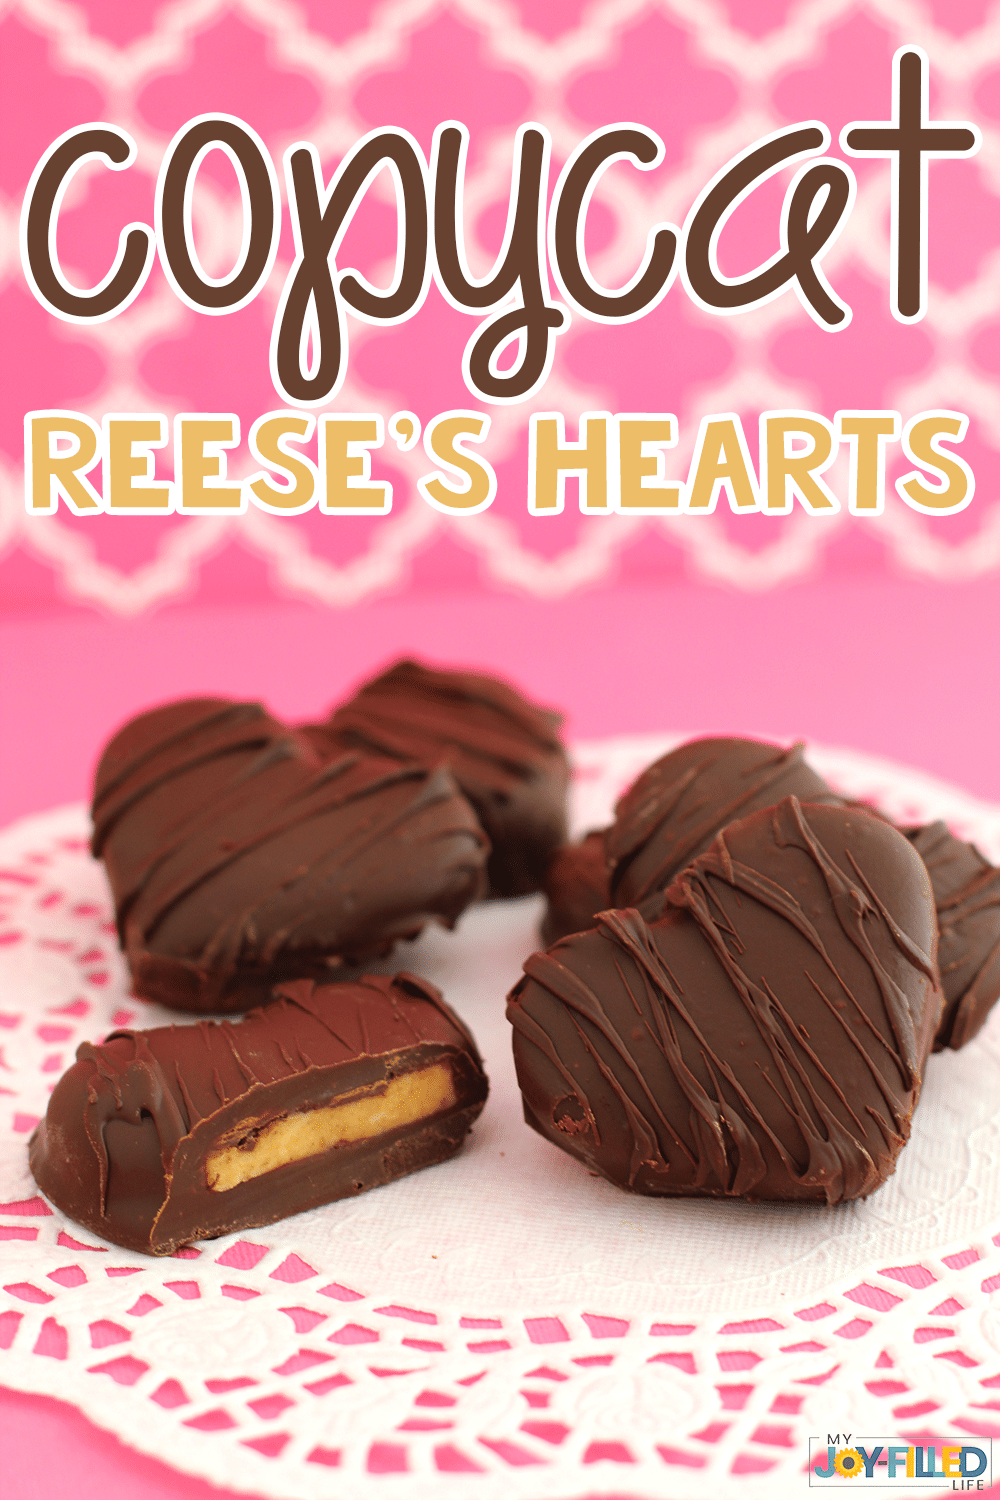 These copycat Reese’s hearts are the perfect Valentine’s Day treat for your sweetheart! They’re easy to make and delicious to eat. #valentinesday #peanutbuttercups #reeses